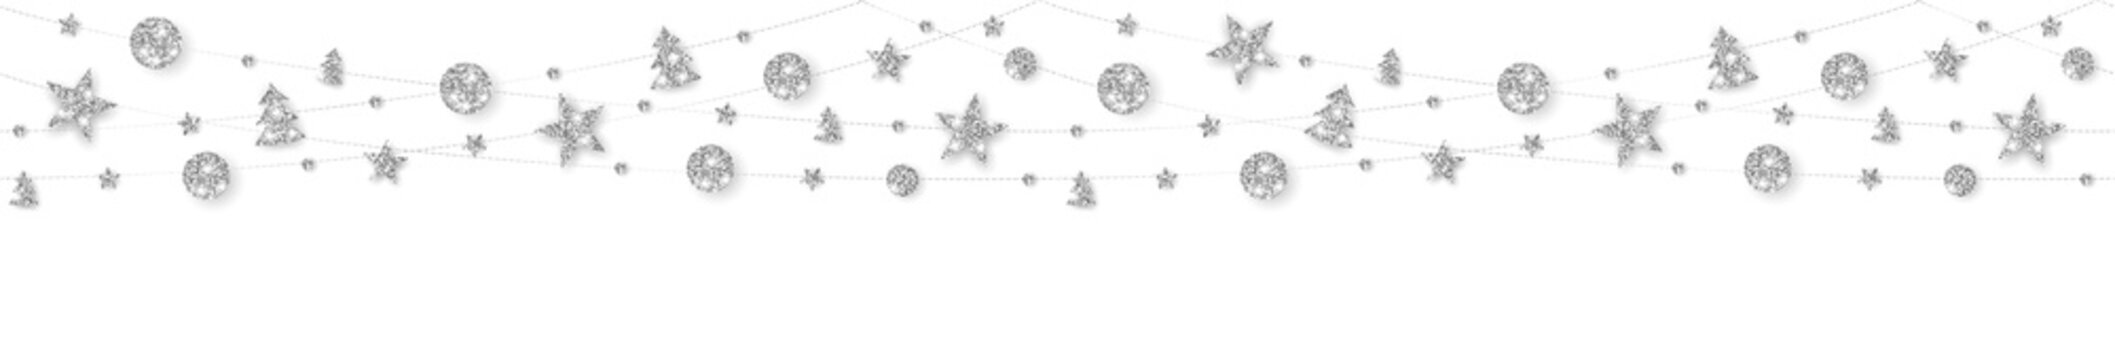 Vector seamless decoration. Silver ornaments on white background.